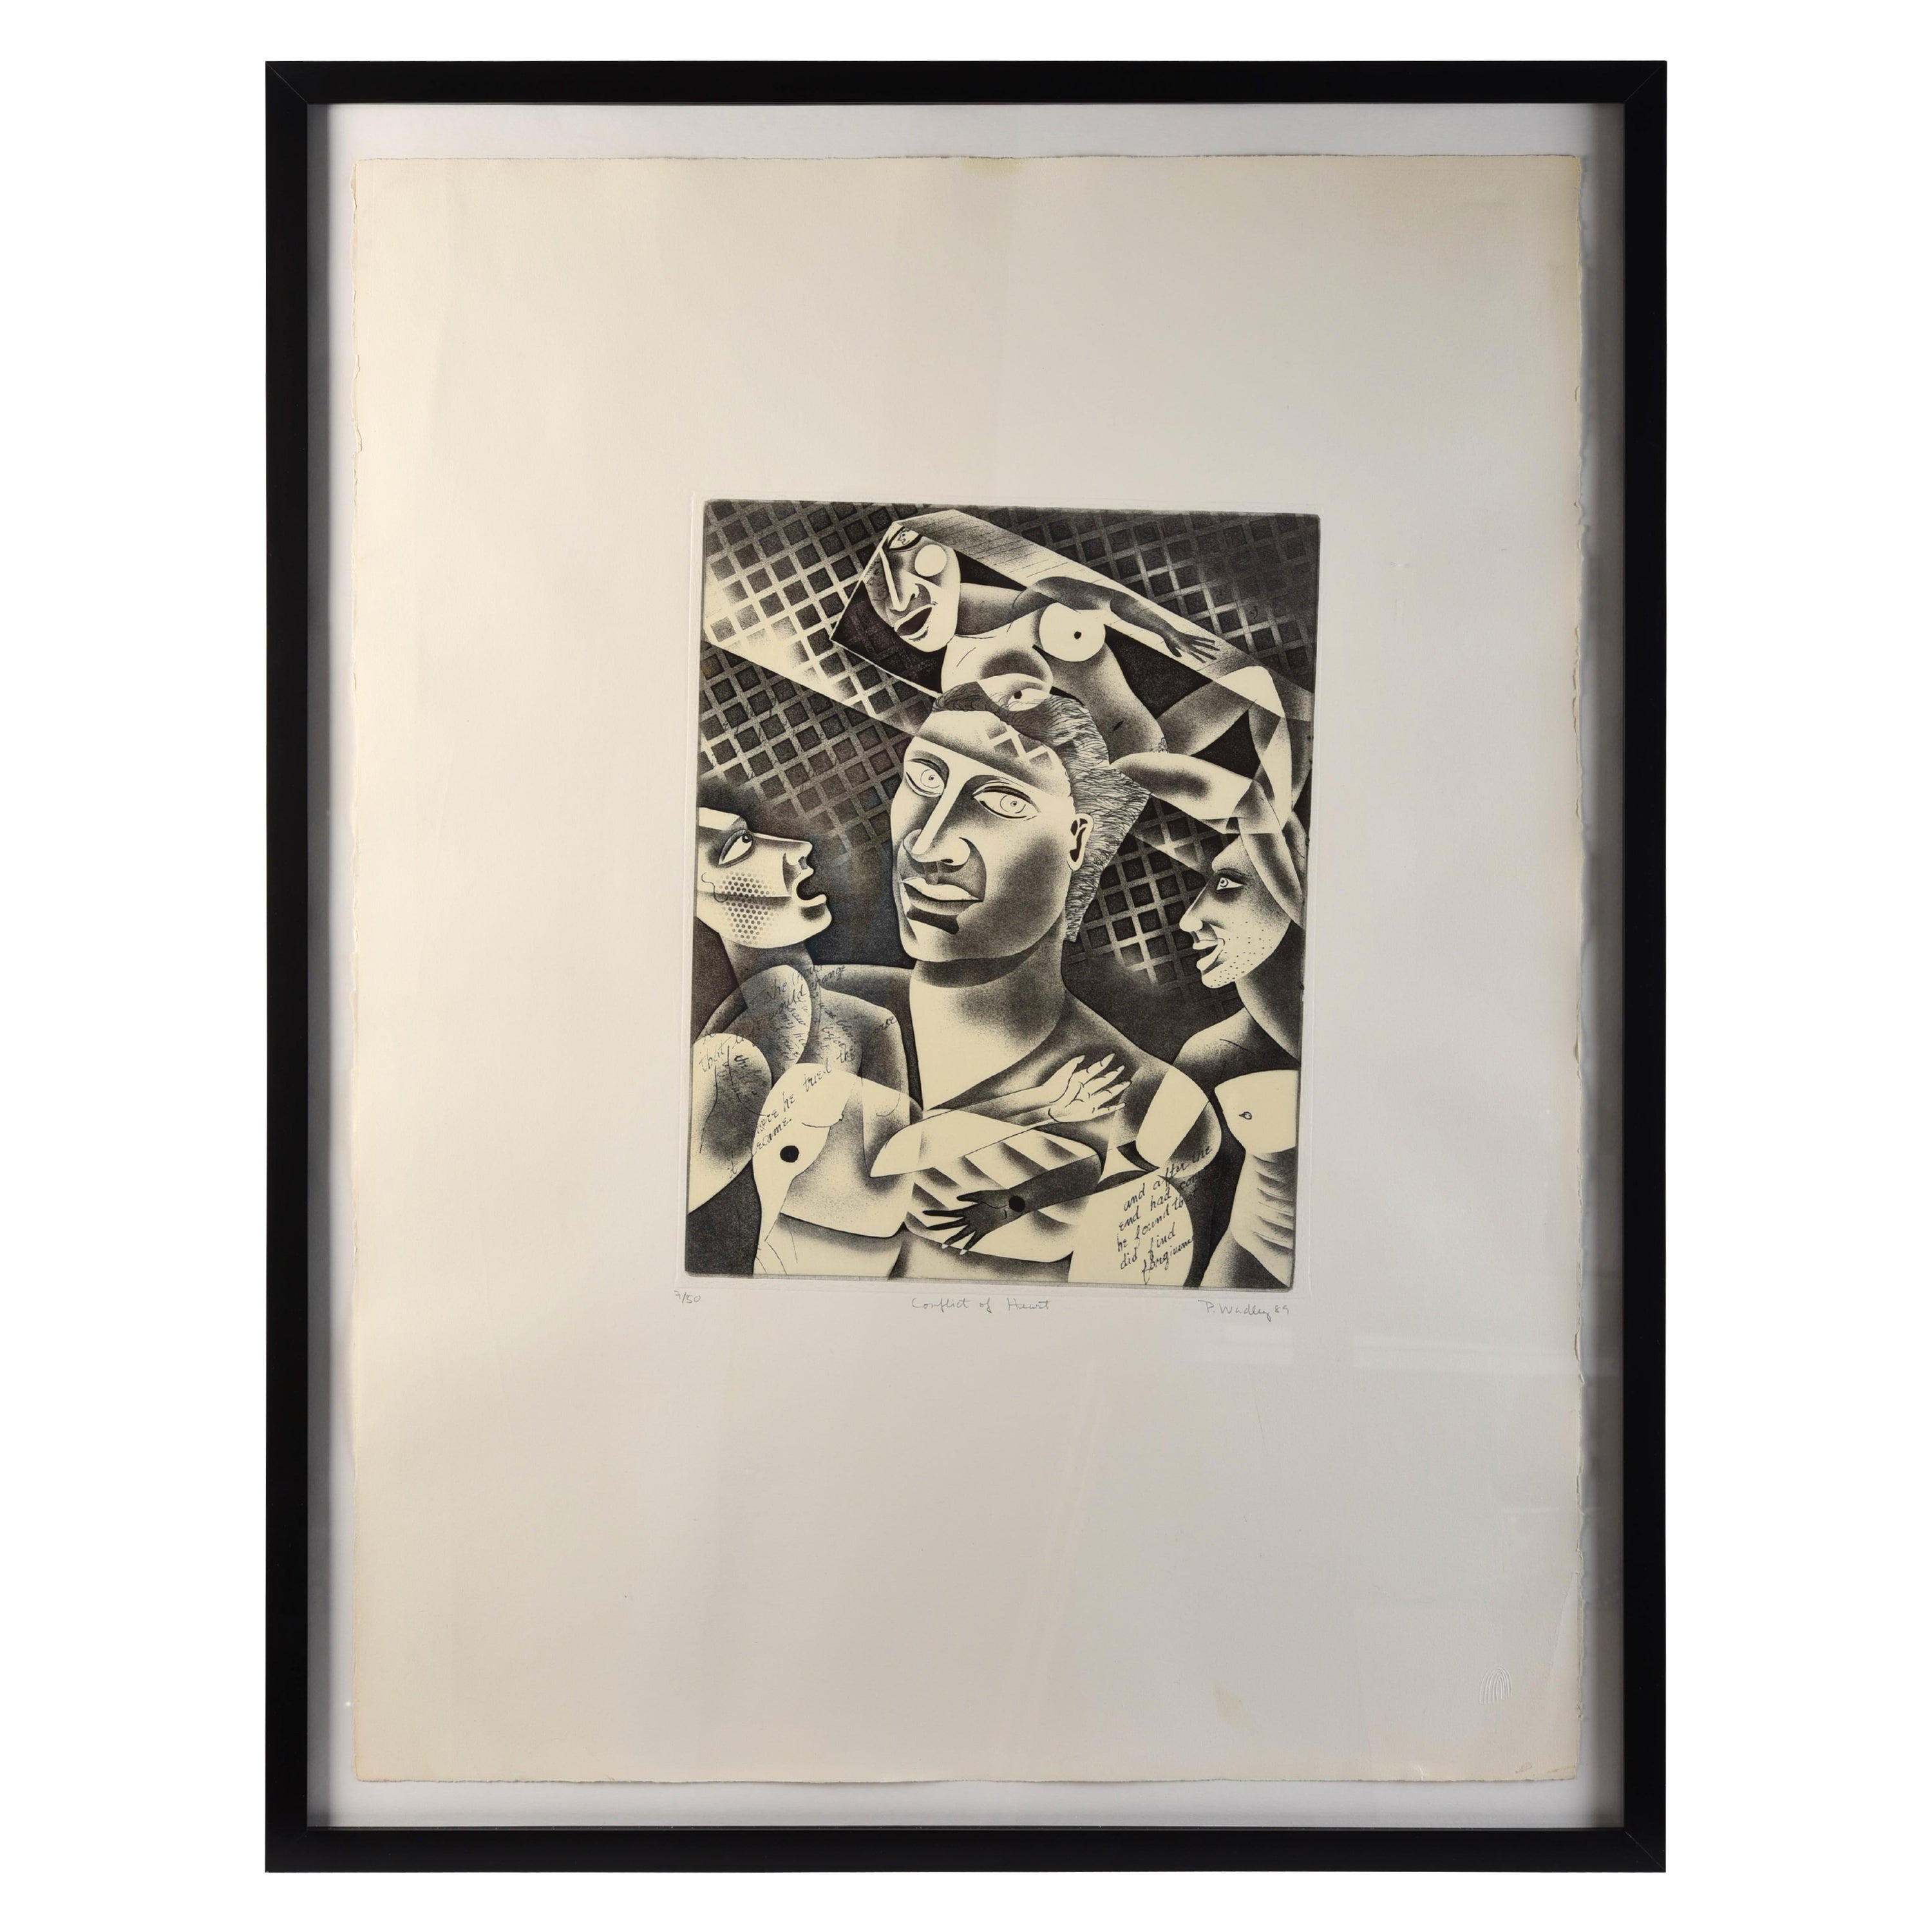 Patrick Wadley (1950-1992) "Conflict of Heart" Signed Print  For Sale